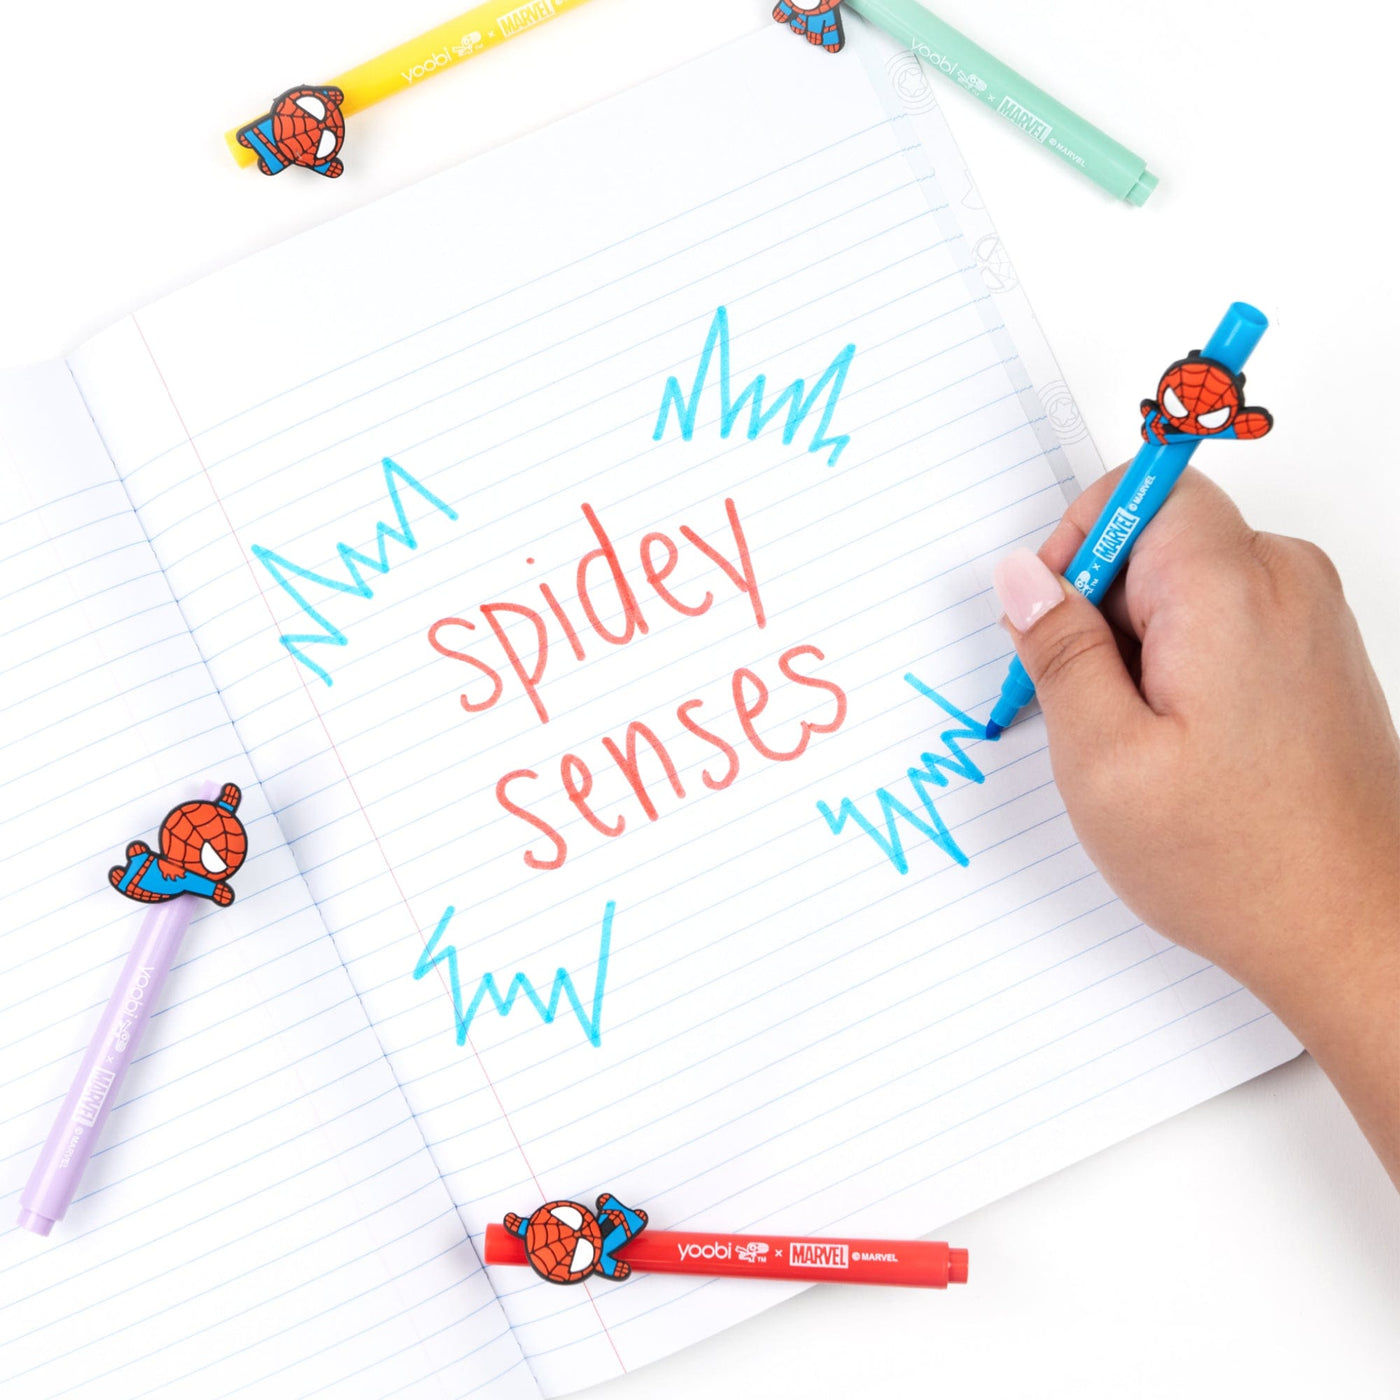 Yoobi x Marvel Spider-Man Mini Markers with Charms 5 Piece Set, 2 pack - Pastels